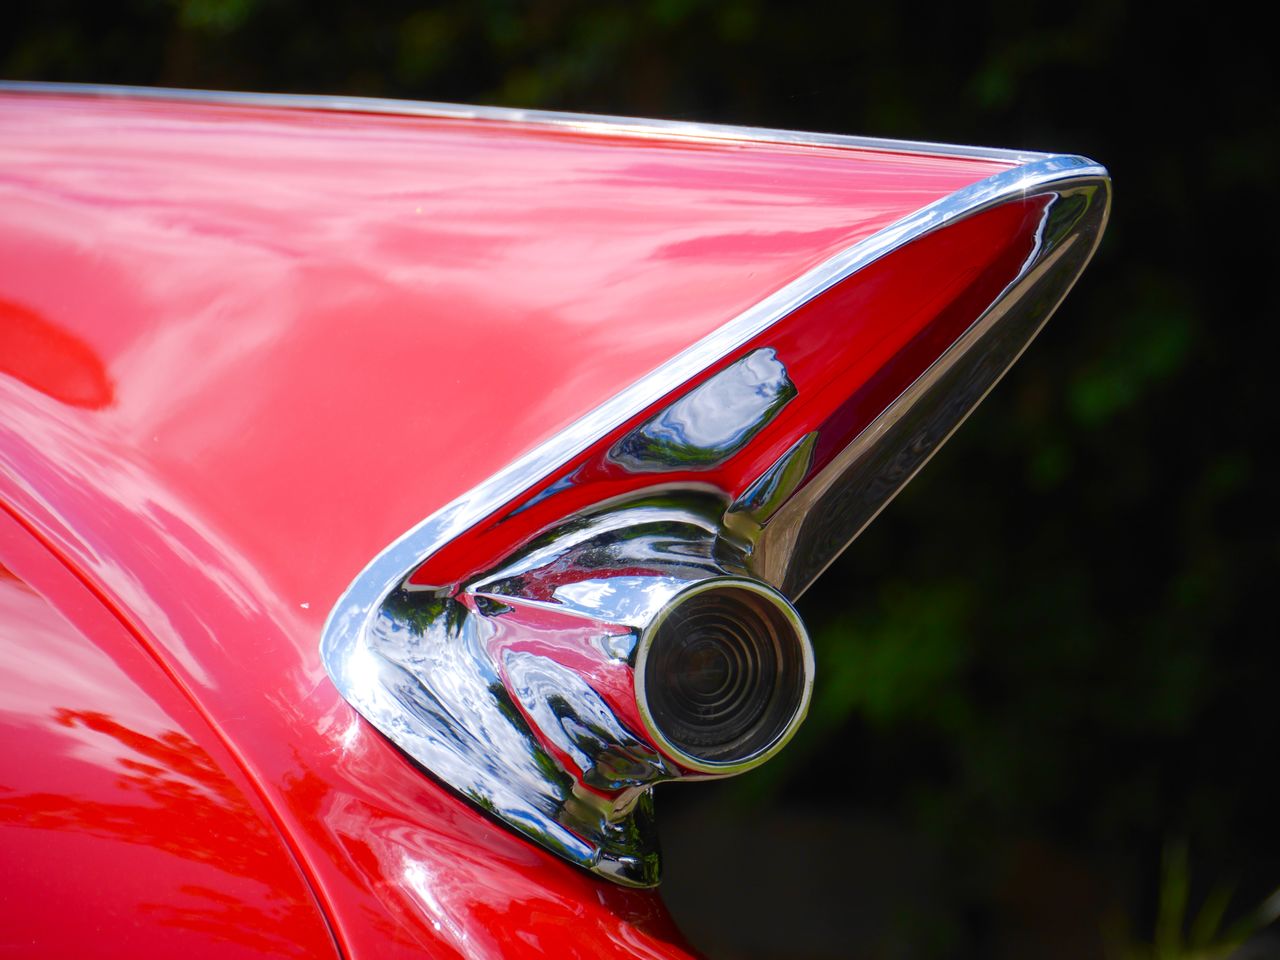 Close-up of red vintage car